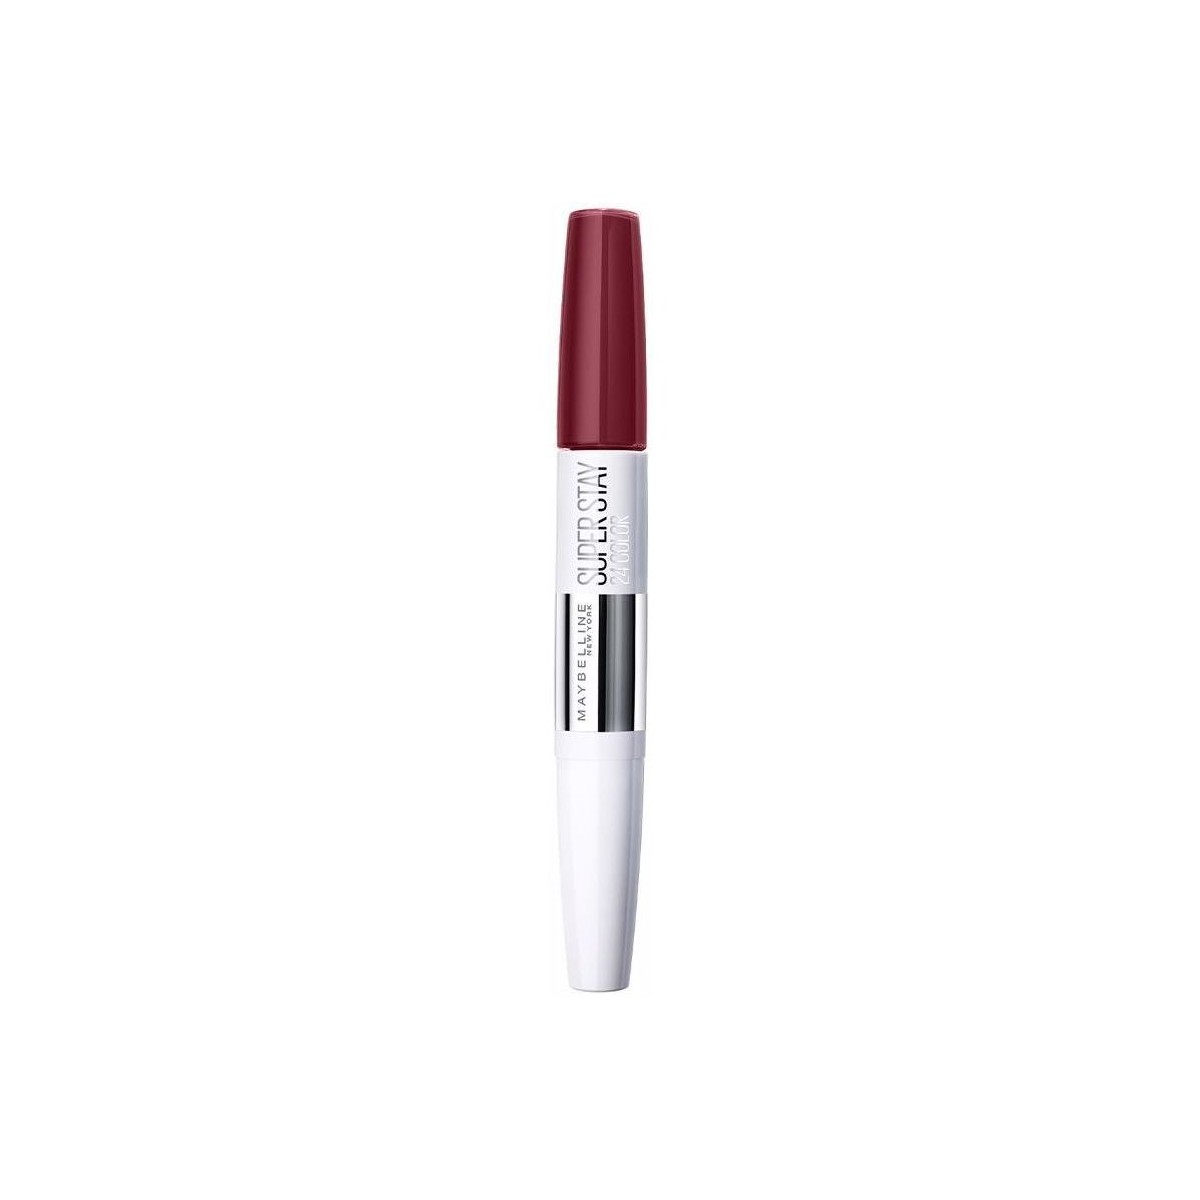 Bellezza Donna Rossetti Maybelline New York Superstay 24h Lip Color 185-rose Dust 